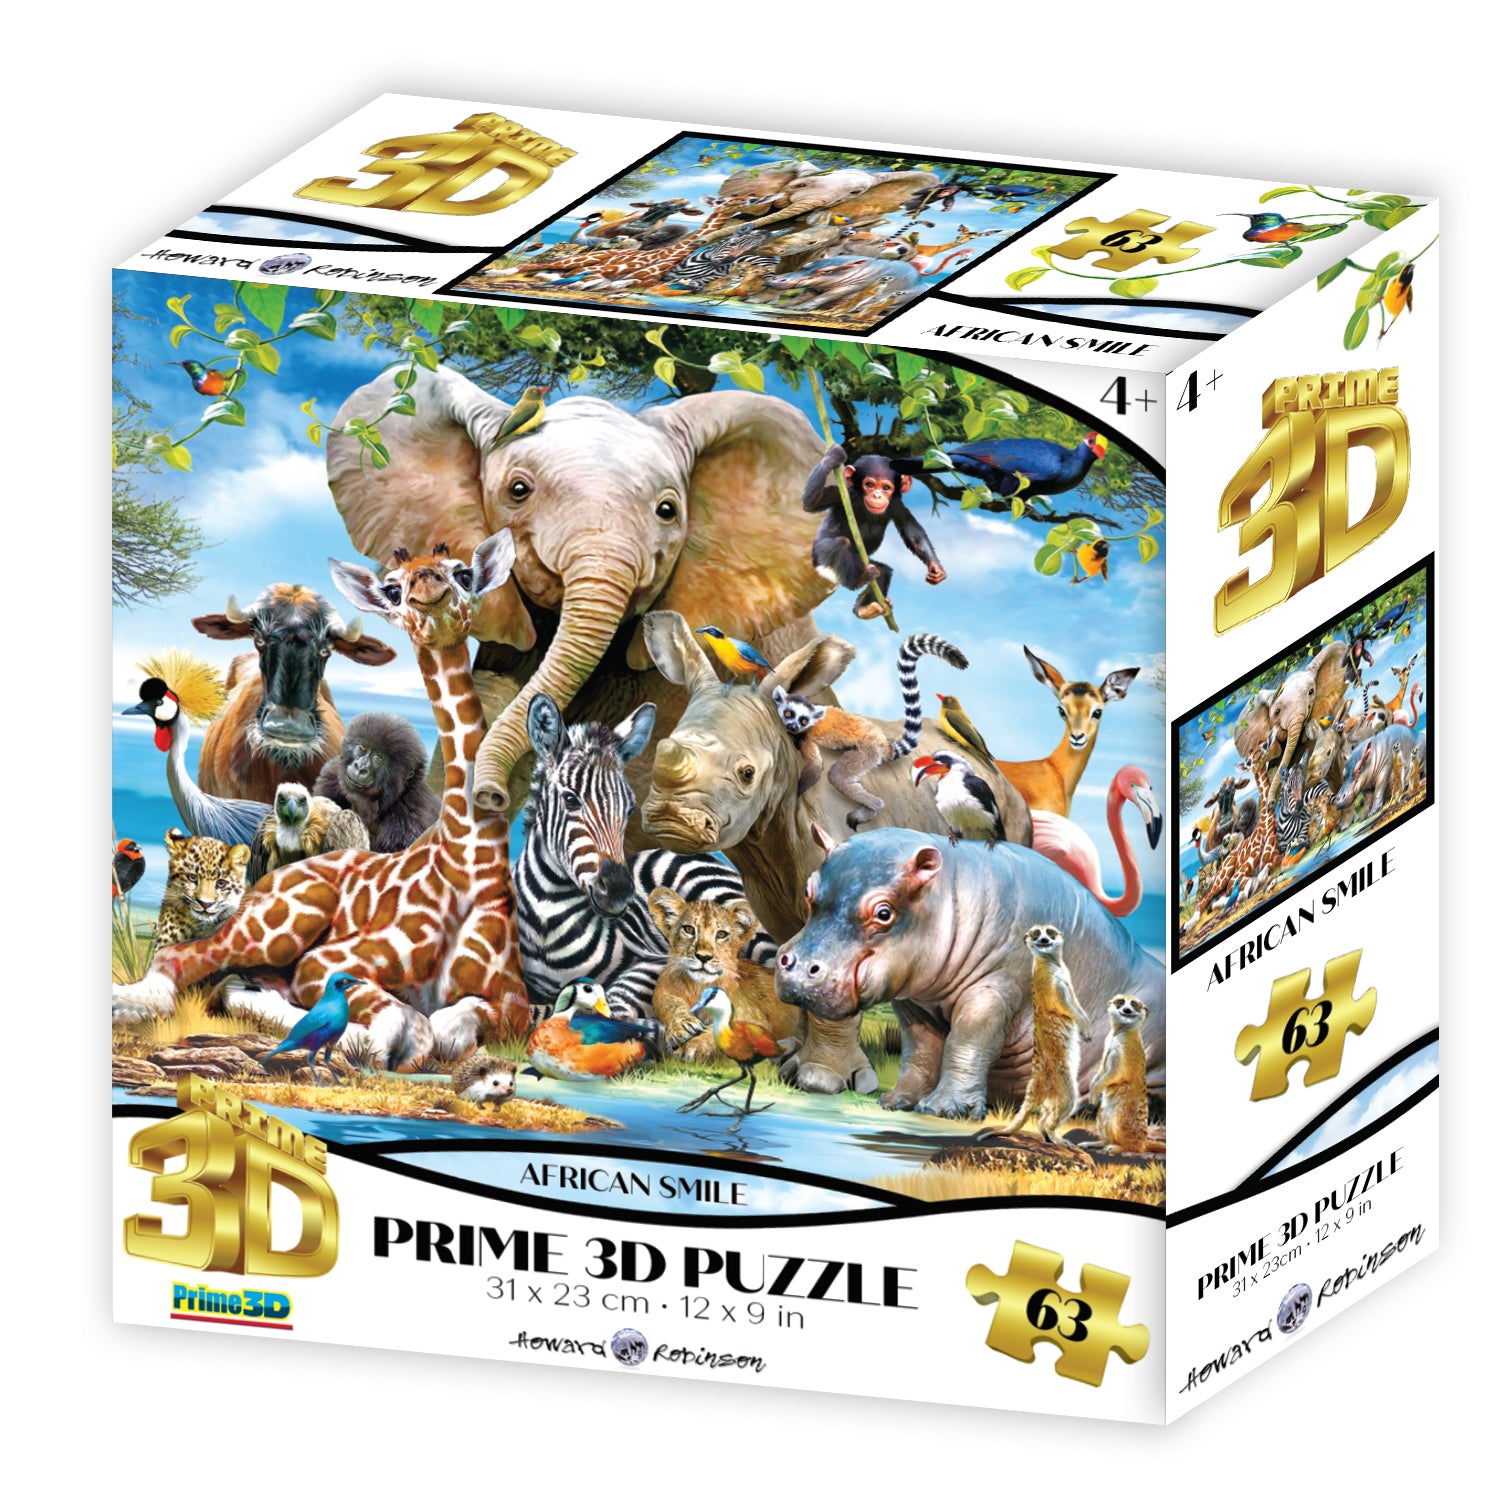 African Smile 63 piece 3D Jigsaw Puzzle - Chester Model Centre